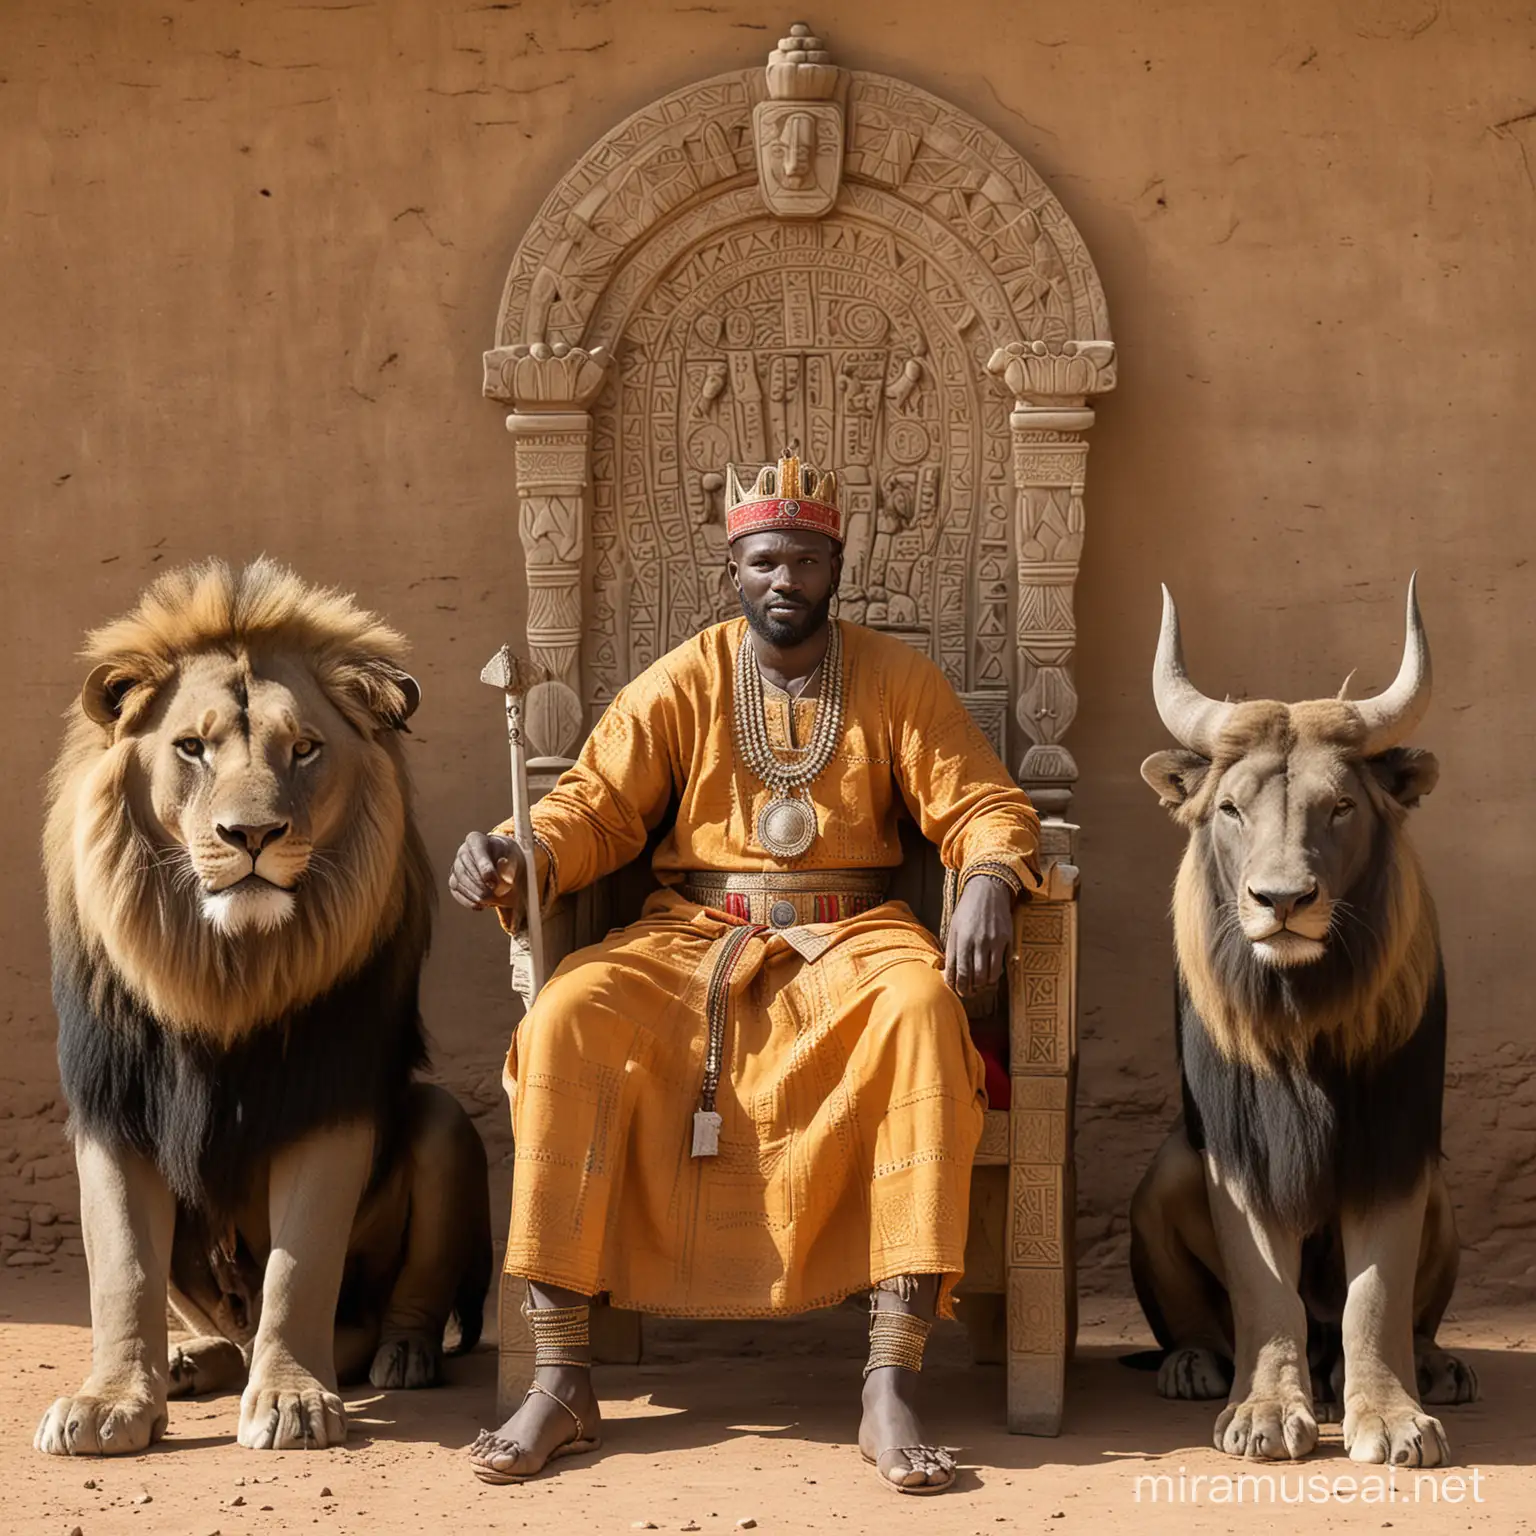 King of Mali sitting on throne in between a lion and an buffalo. 